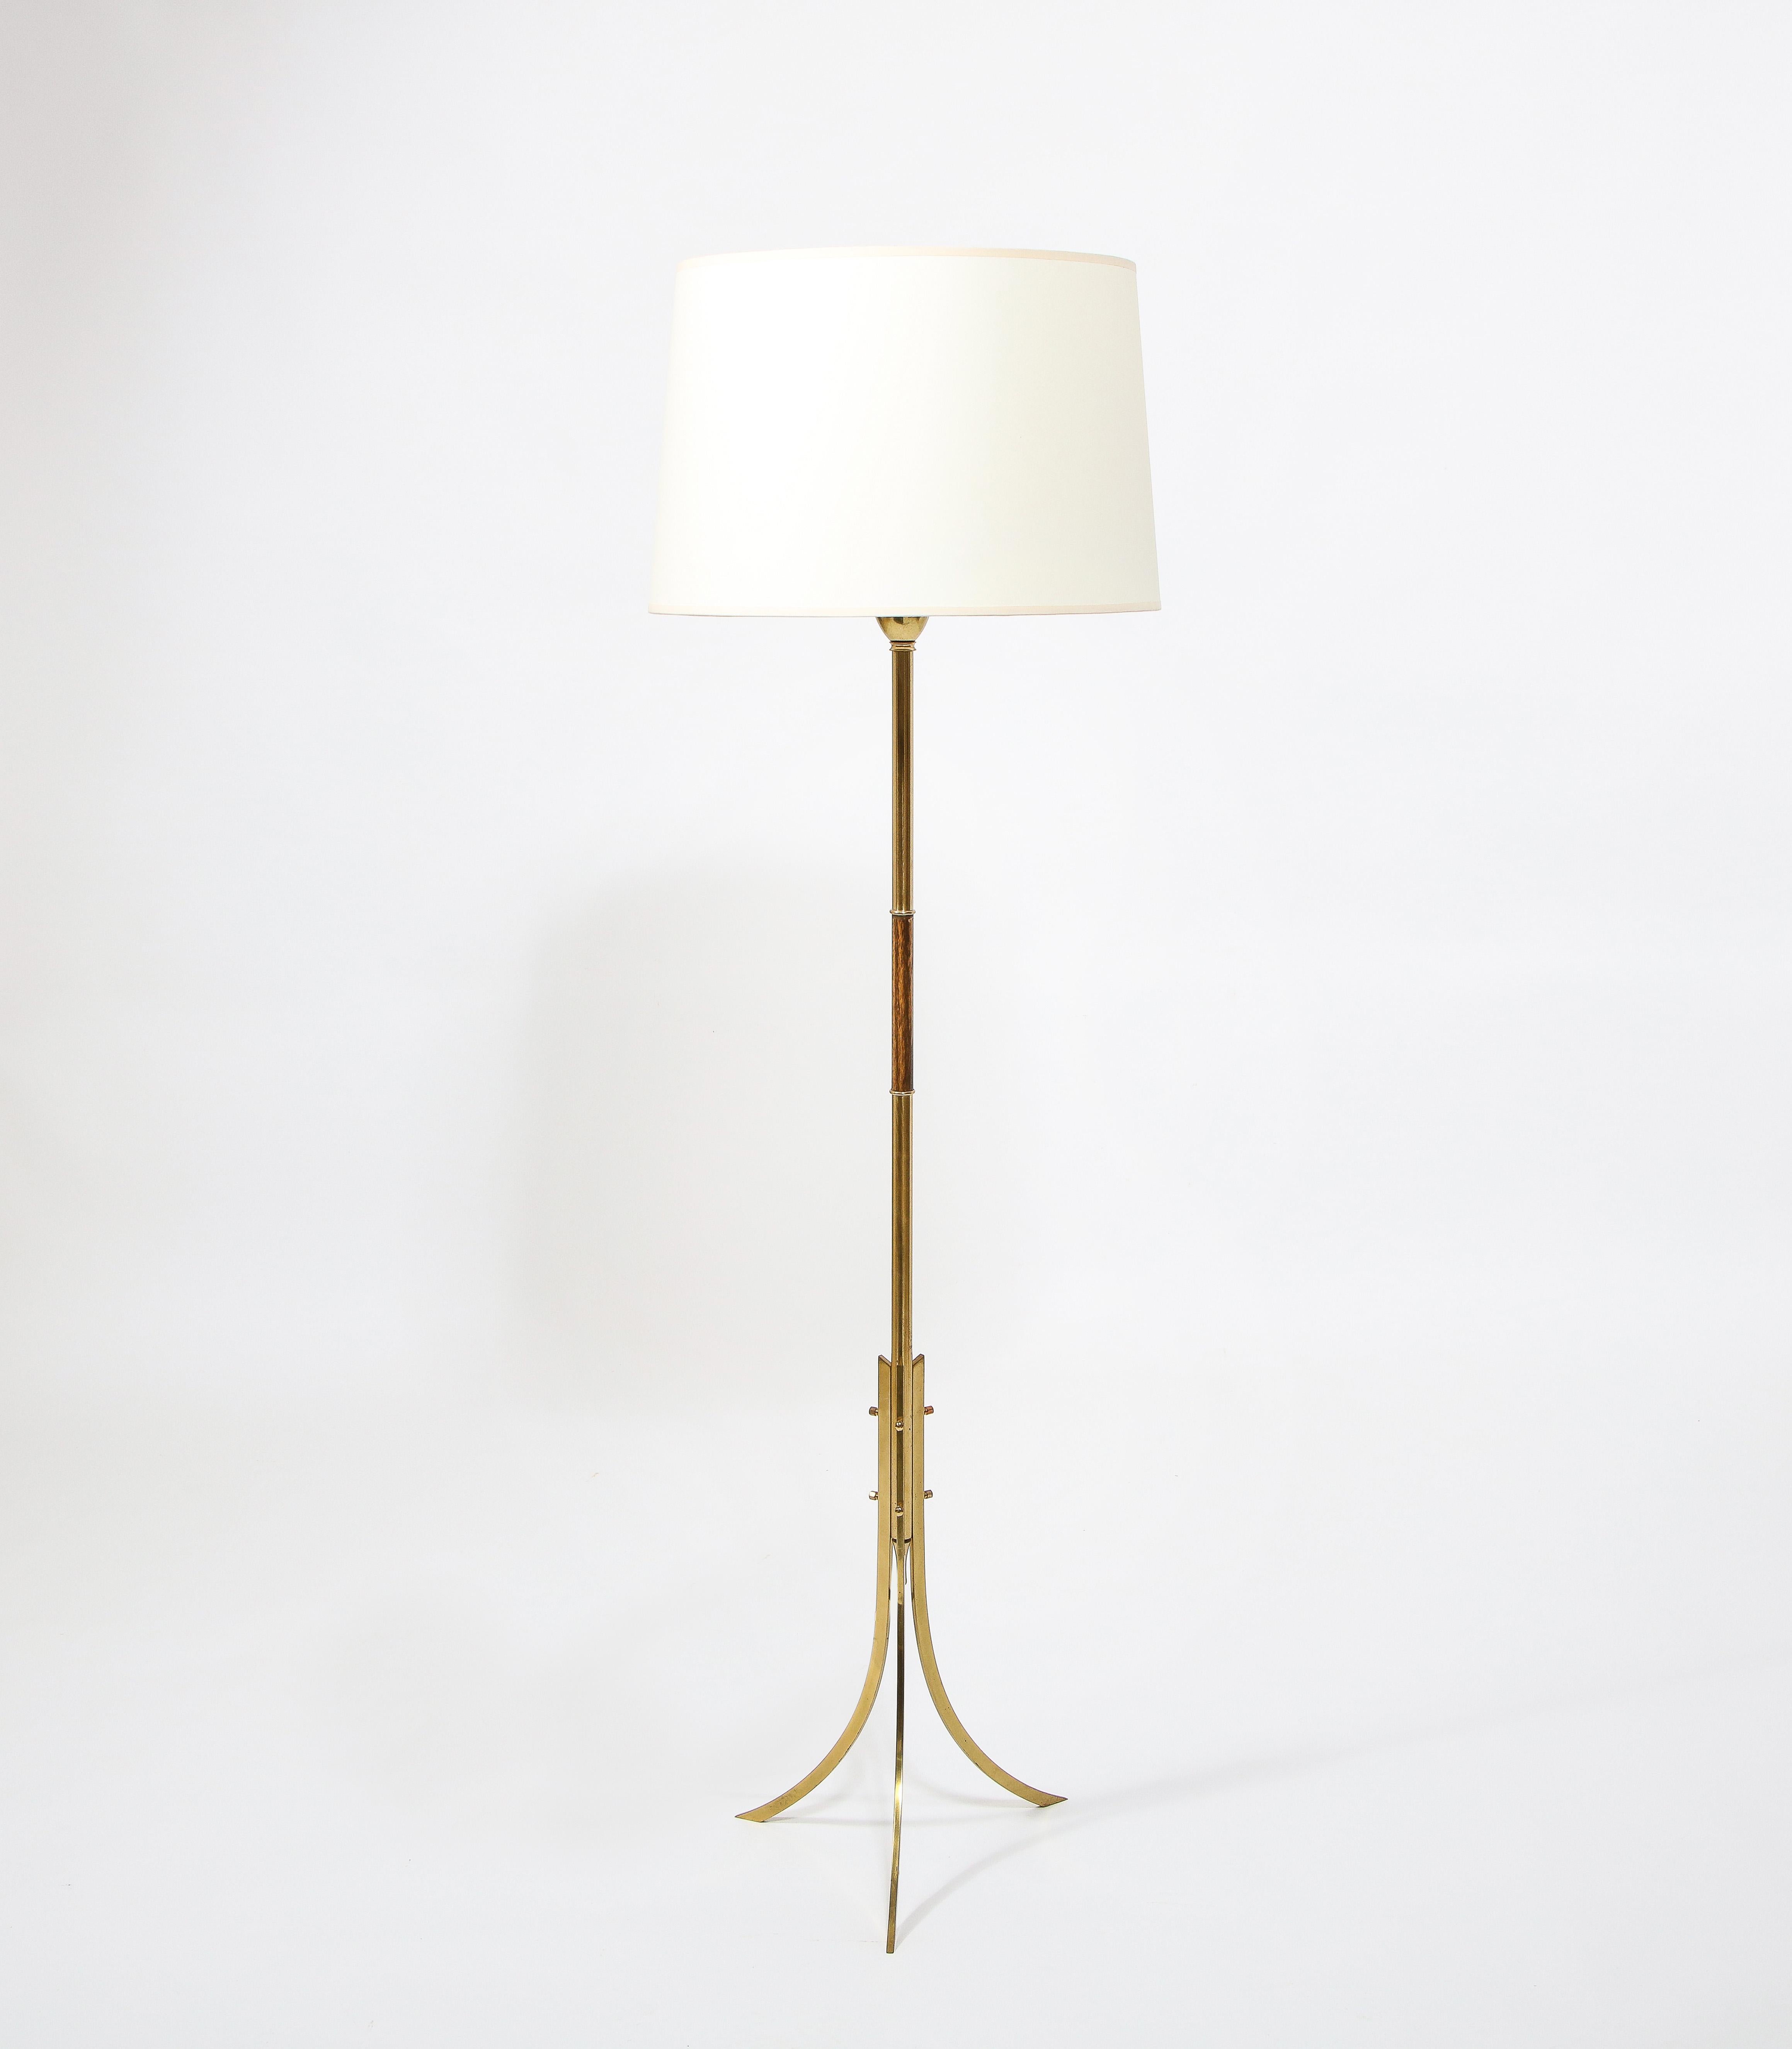 Minimal tripod floor lamp in brass, the legs are three curved blades of brass bolted to the stem with accorn nuts. Shade is for photographic purposes.